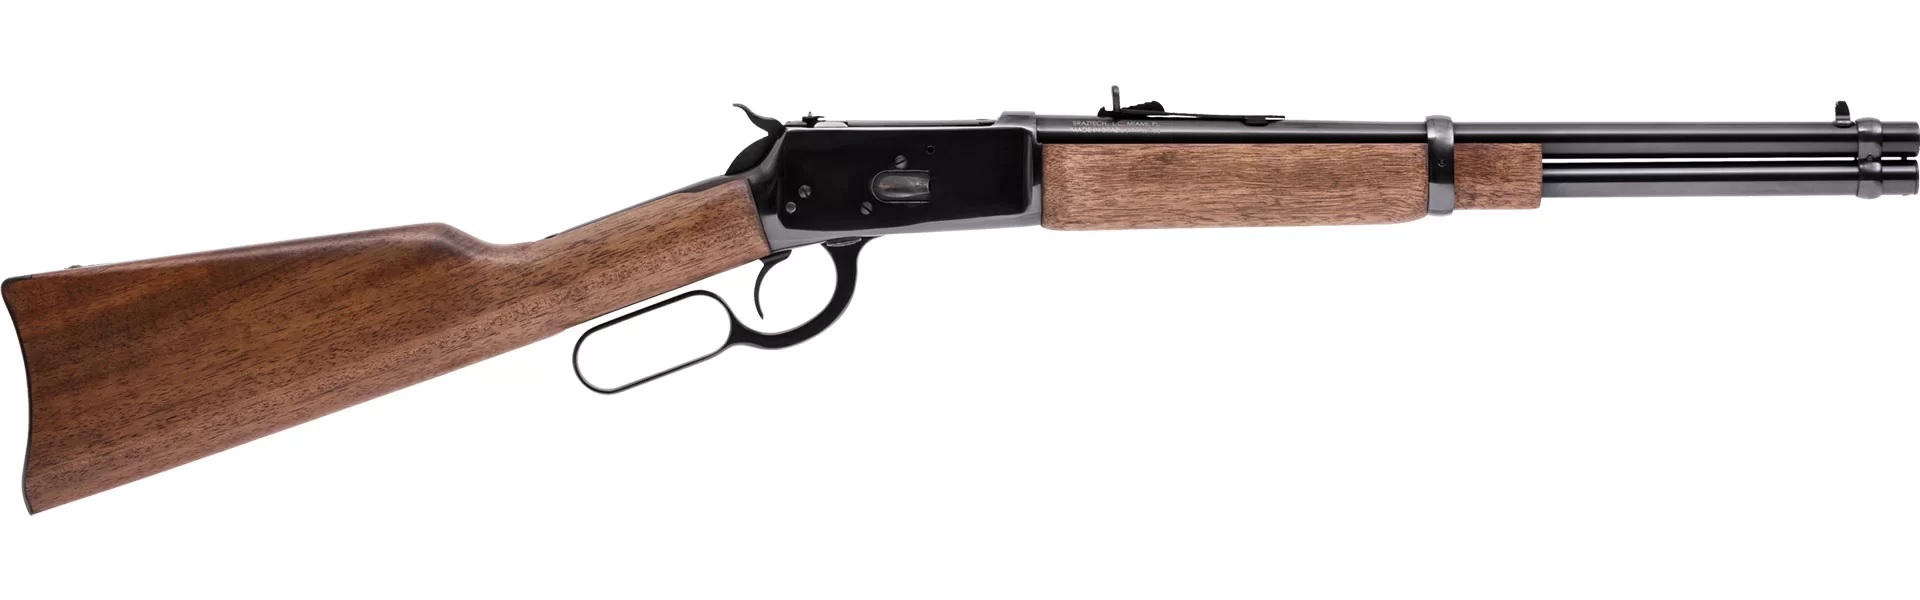 Rossi R92 Lever Action Rifle, .44 Magnum, 16" Barrel NEW 920441613-img-1